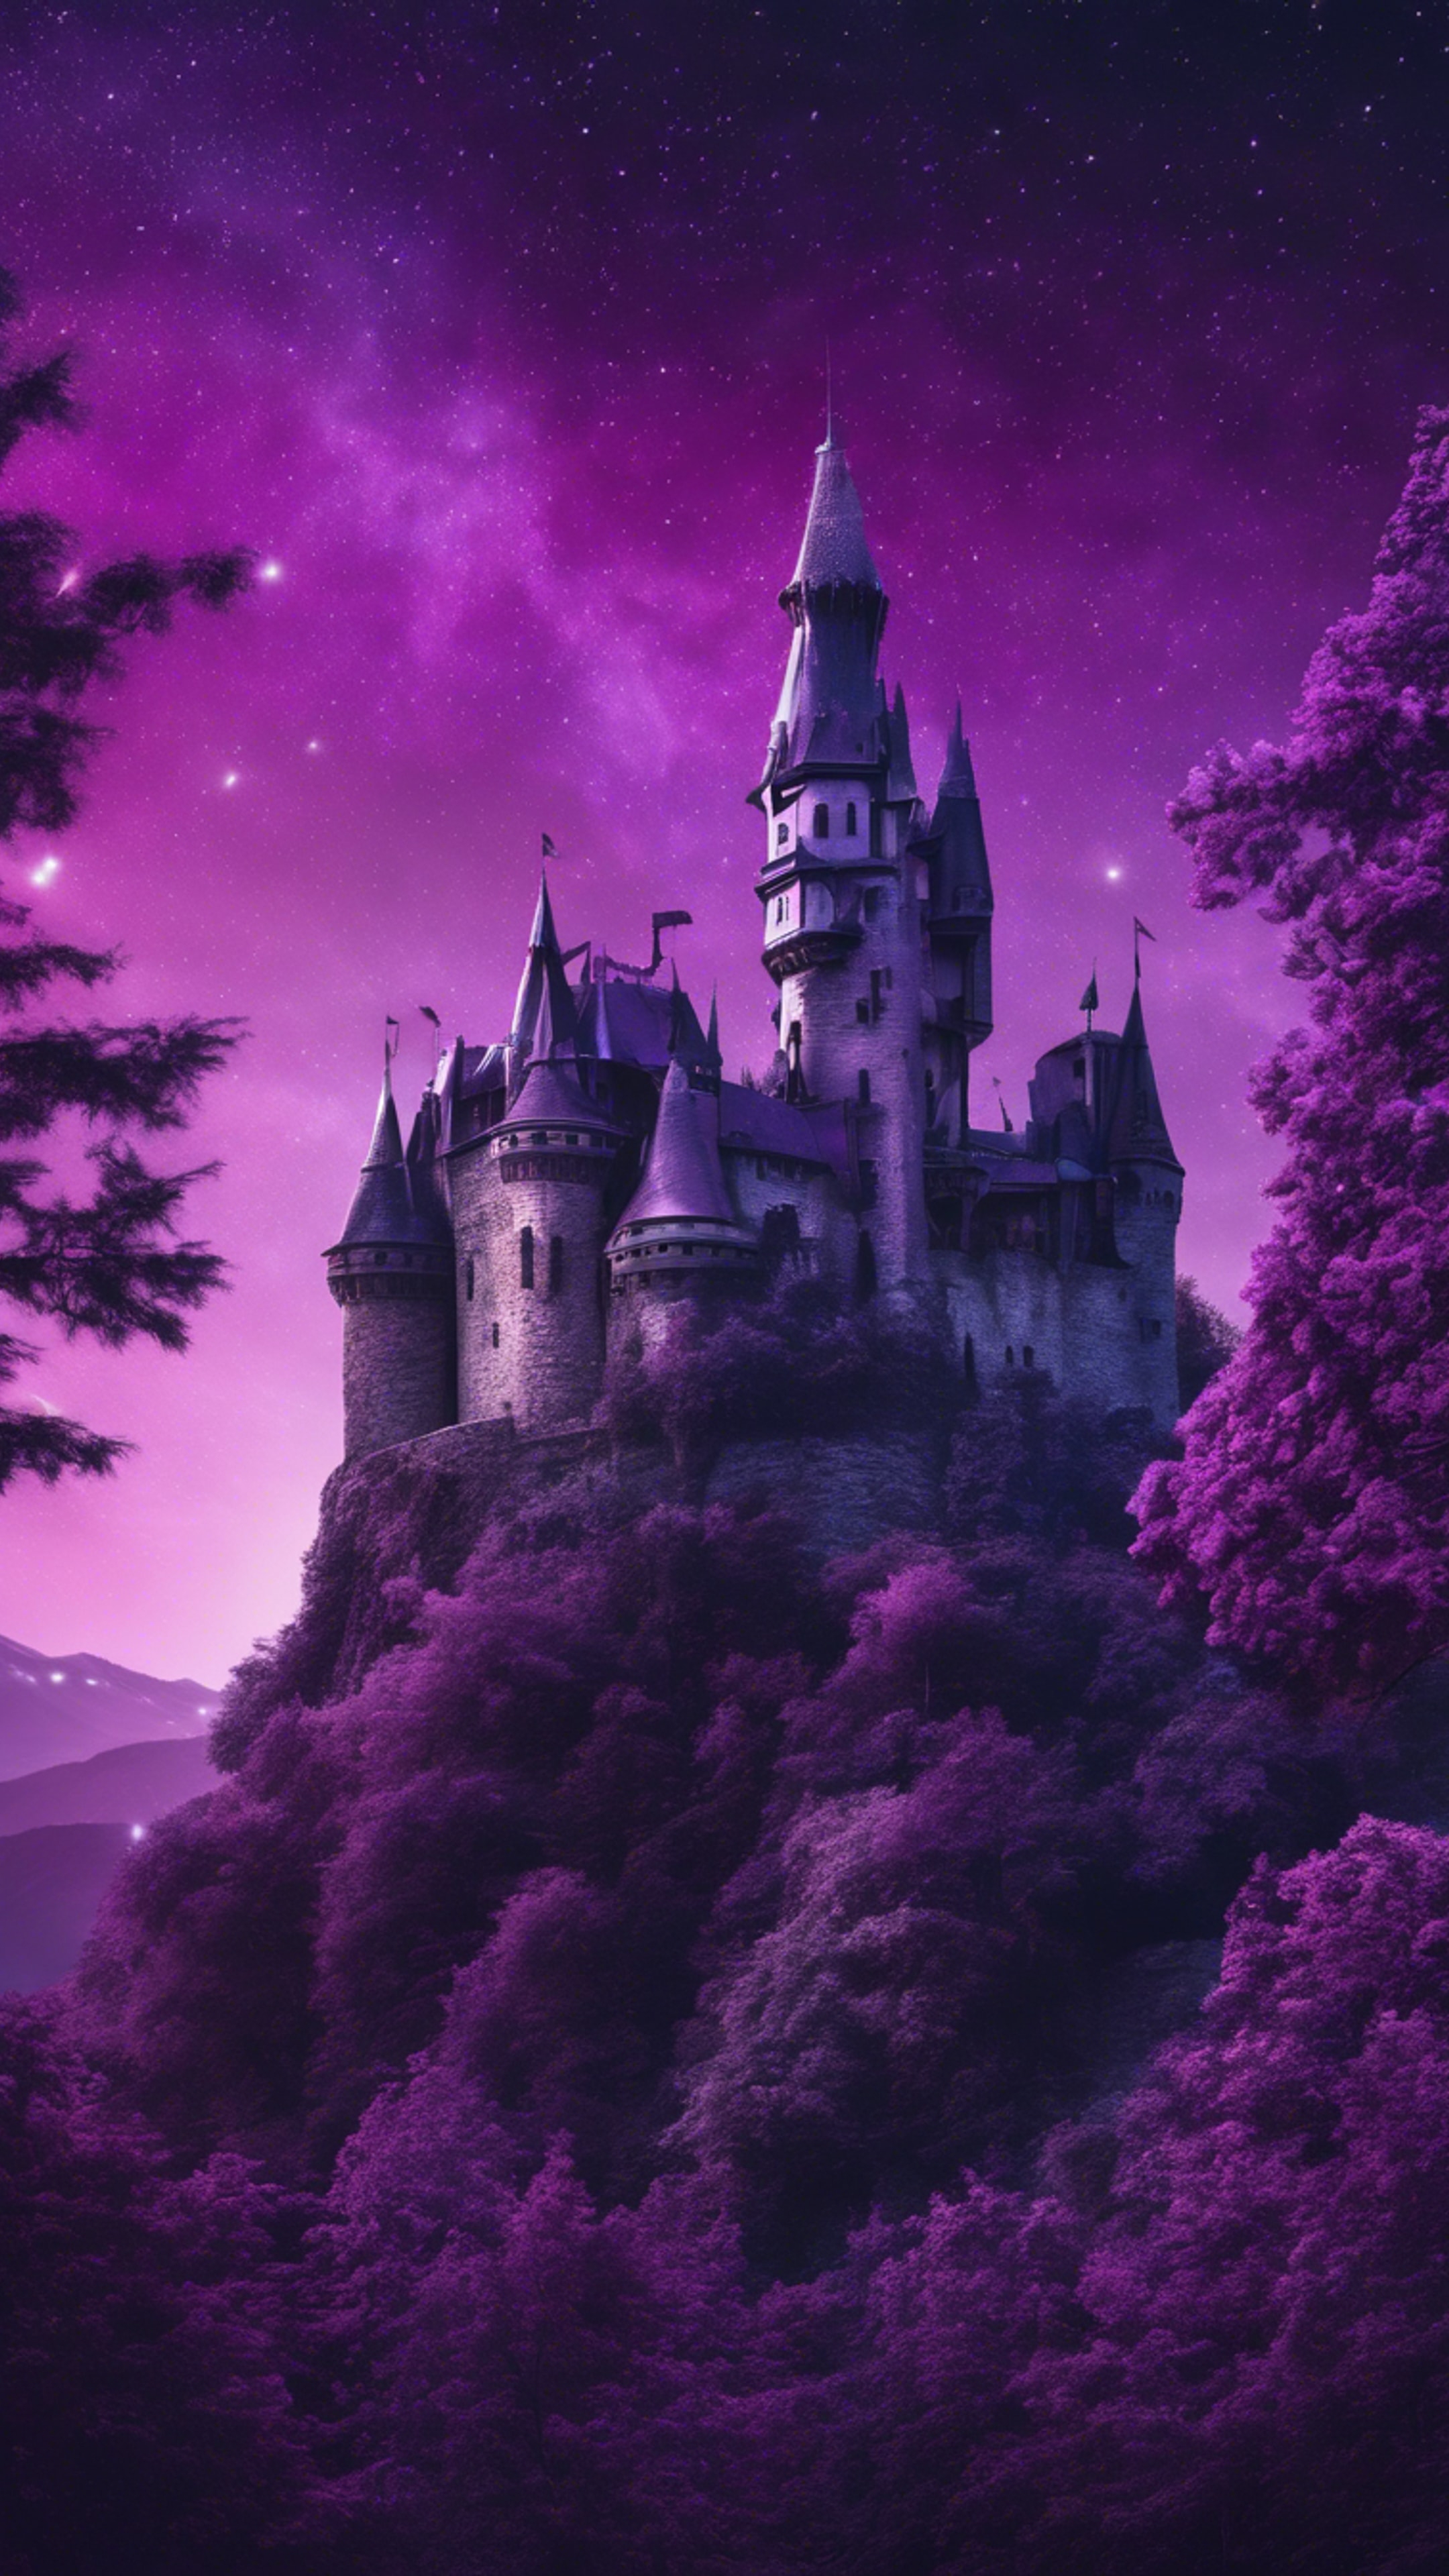 An imaginative collage including a deep purple night sky, a majestic purple castle, and a lush violet forest. Тапет[d69784f3cee744e79a0a]